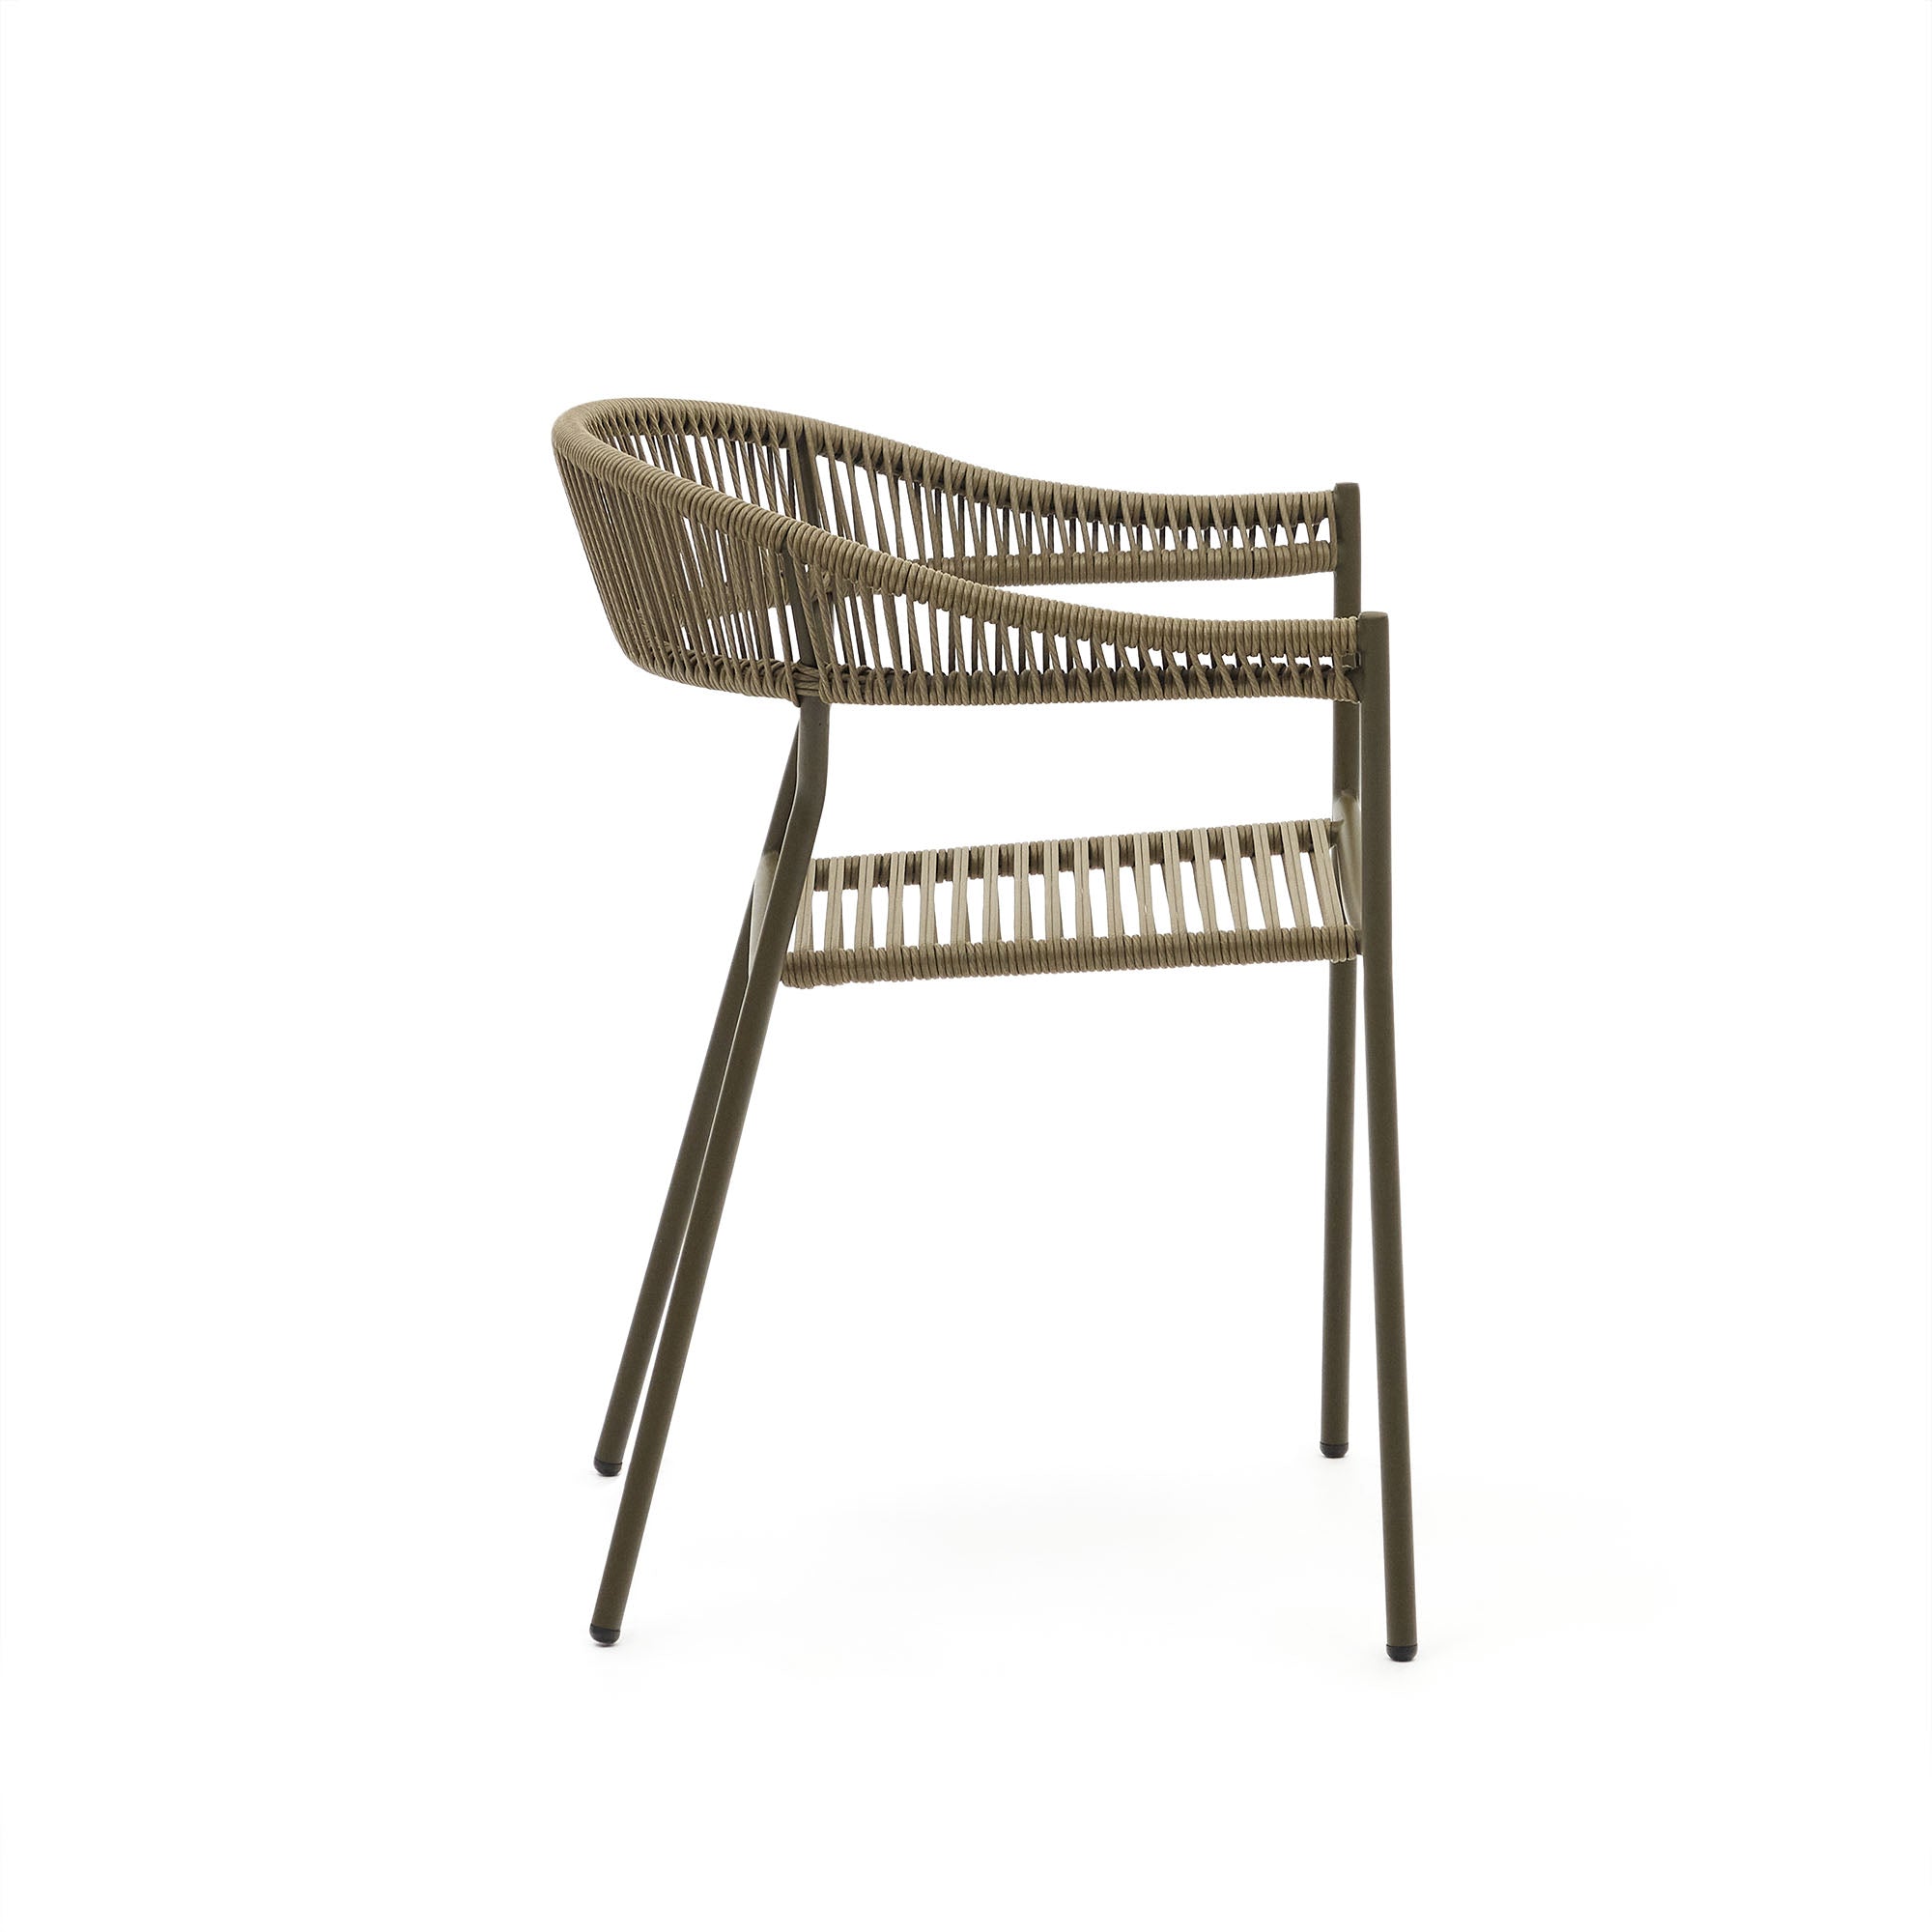 Futadera stackable outdoor chair in green synthetic cord and green painted steel